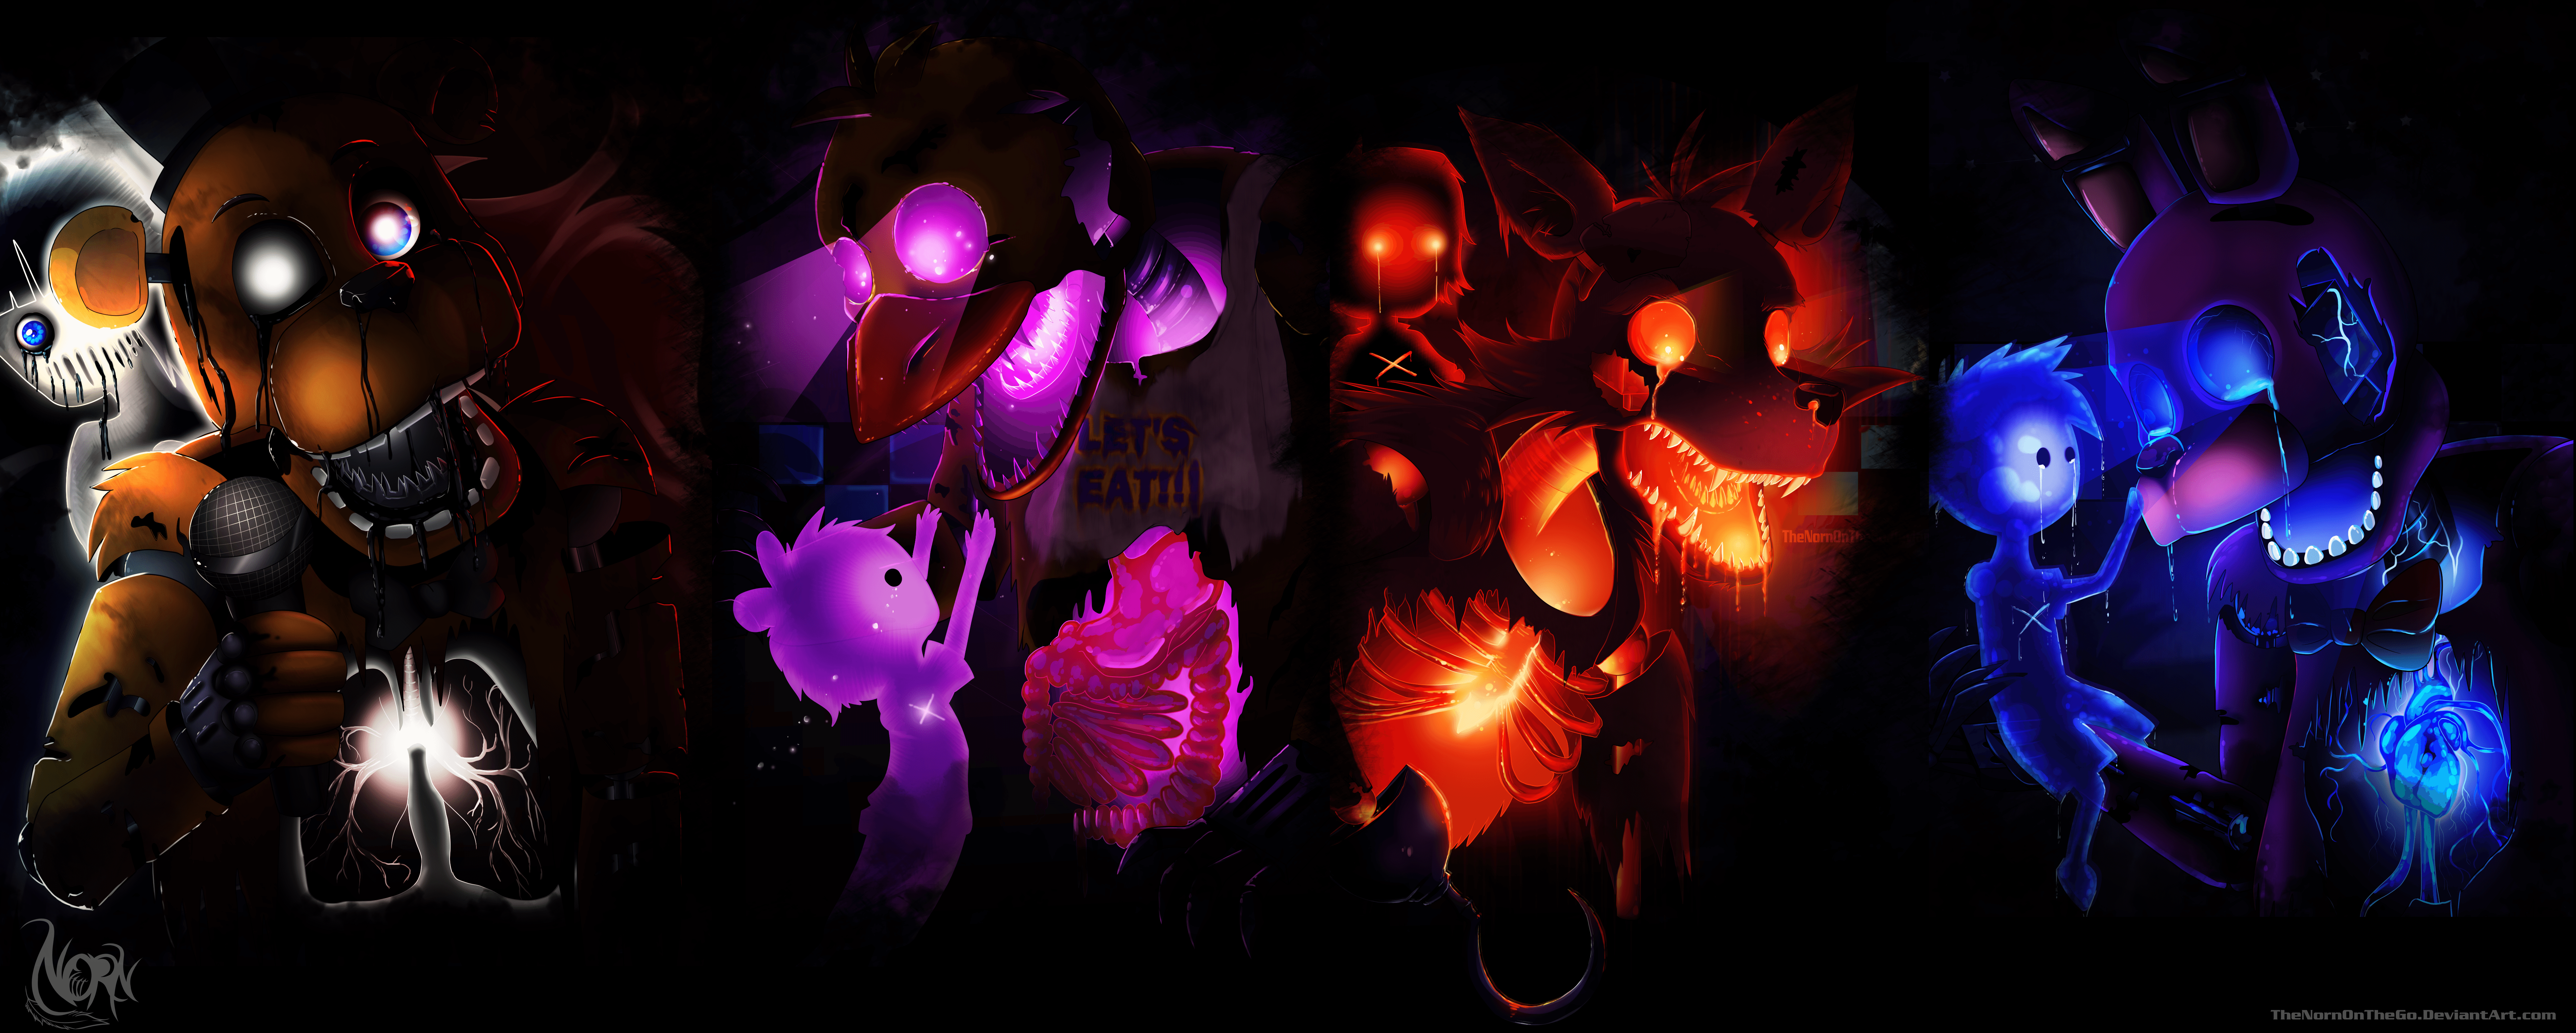 Five Nights at Freddy&Wallpapers by TheNornOnTheGo